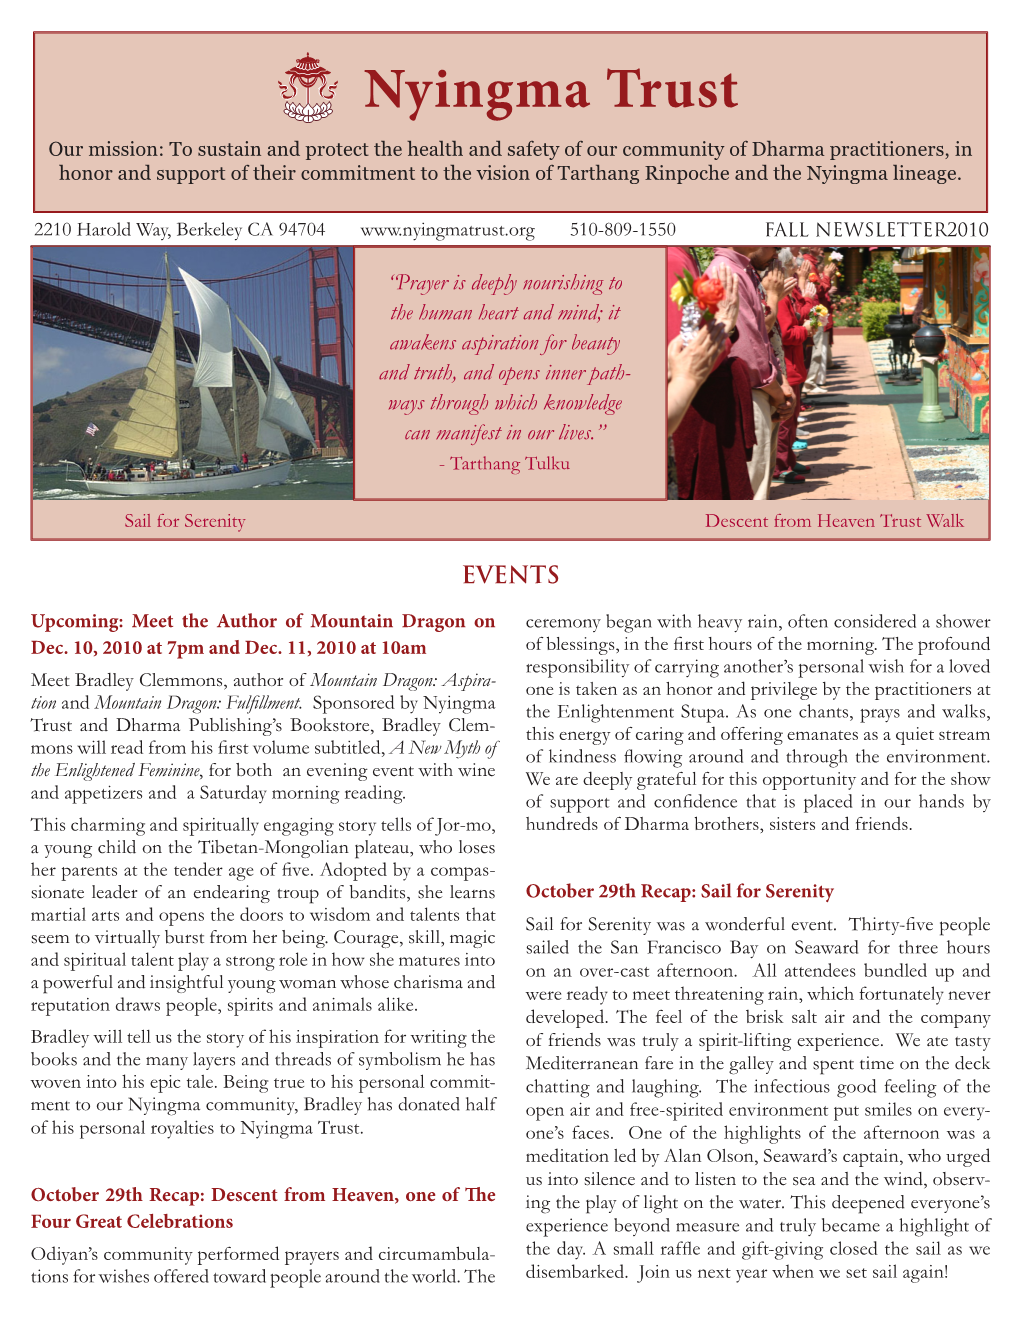 Download the Fall 2010 Newsletter (PDF)